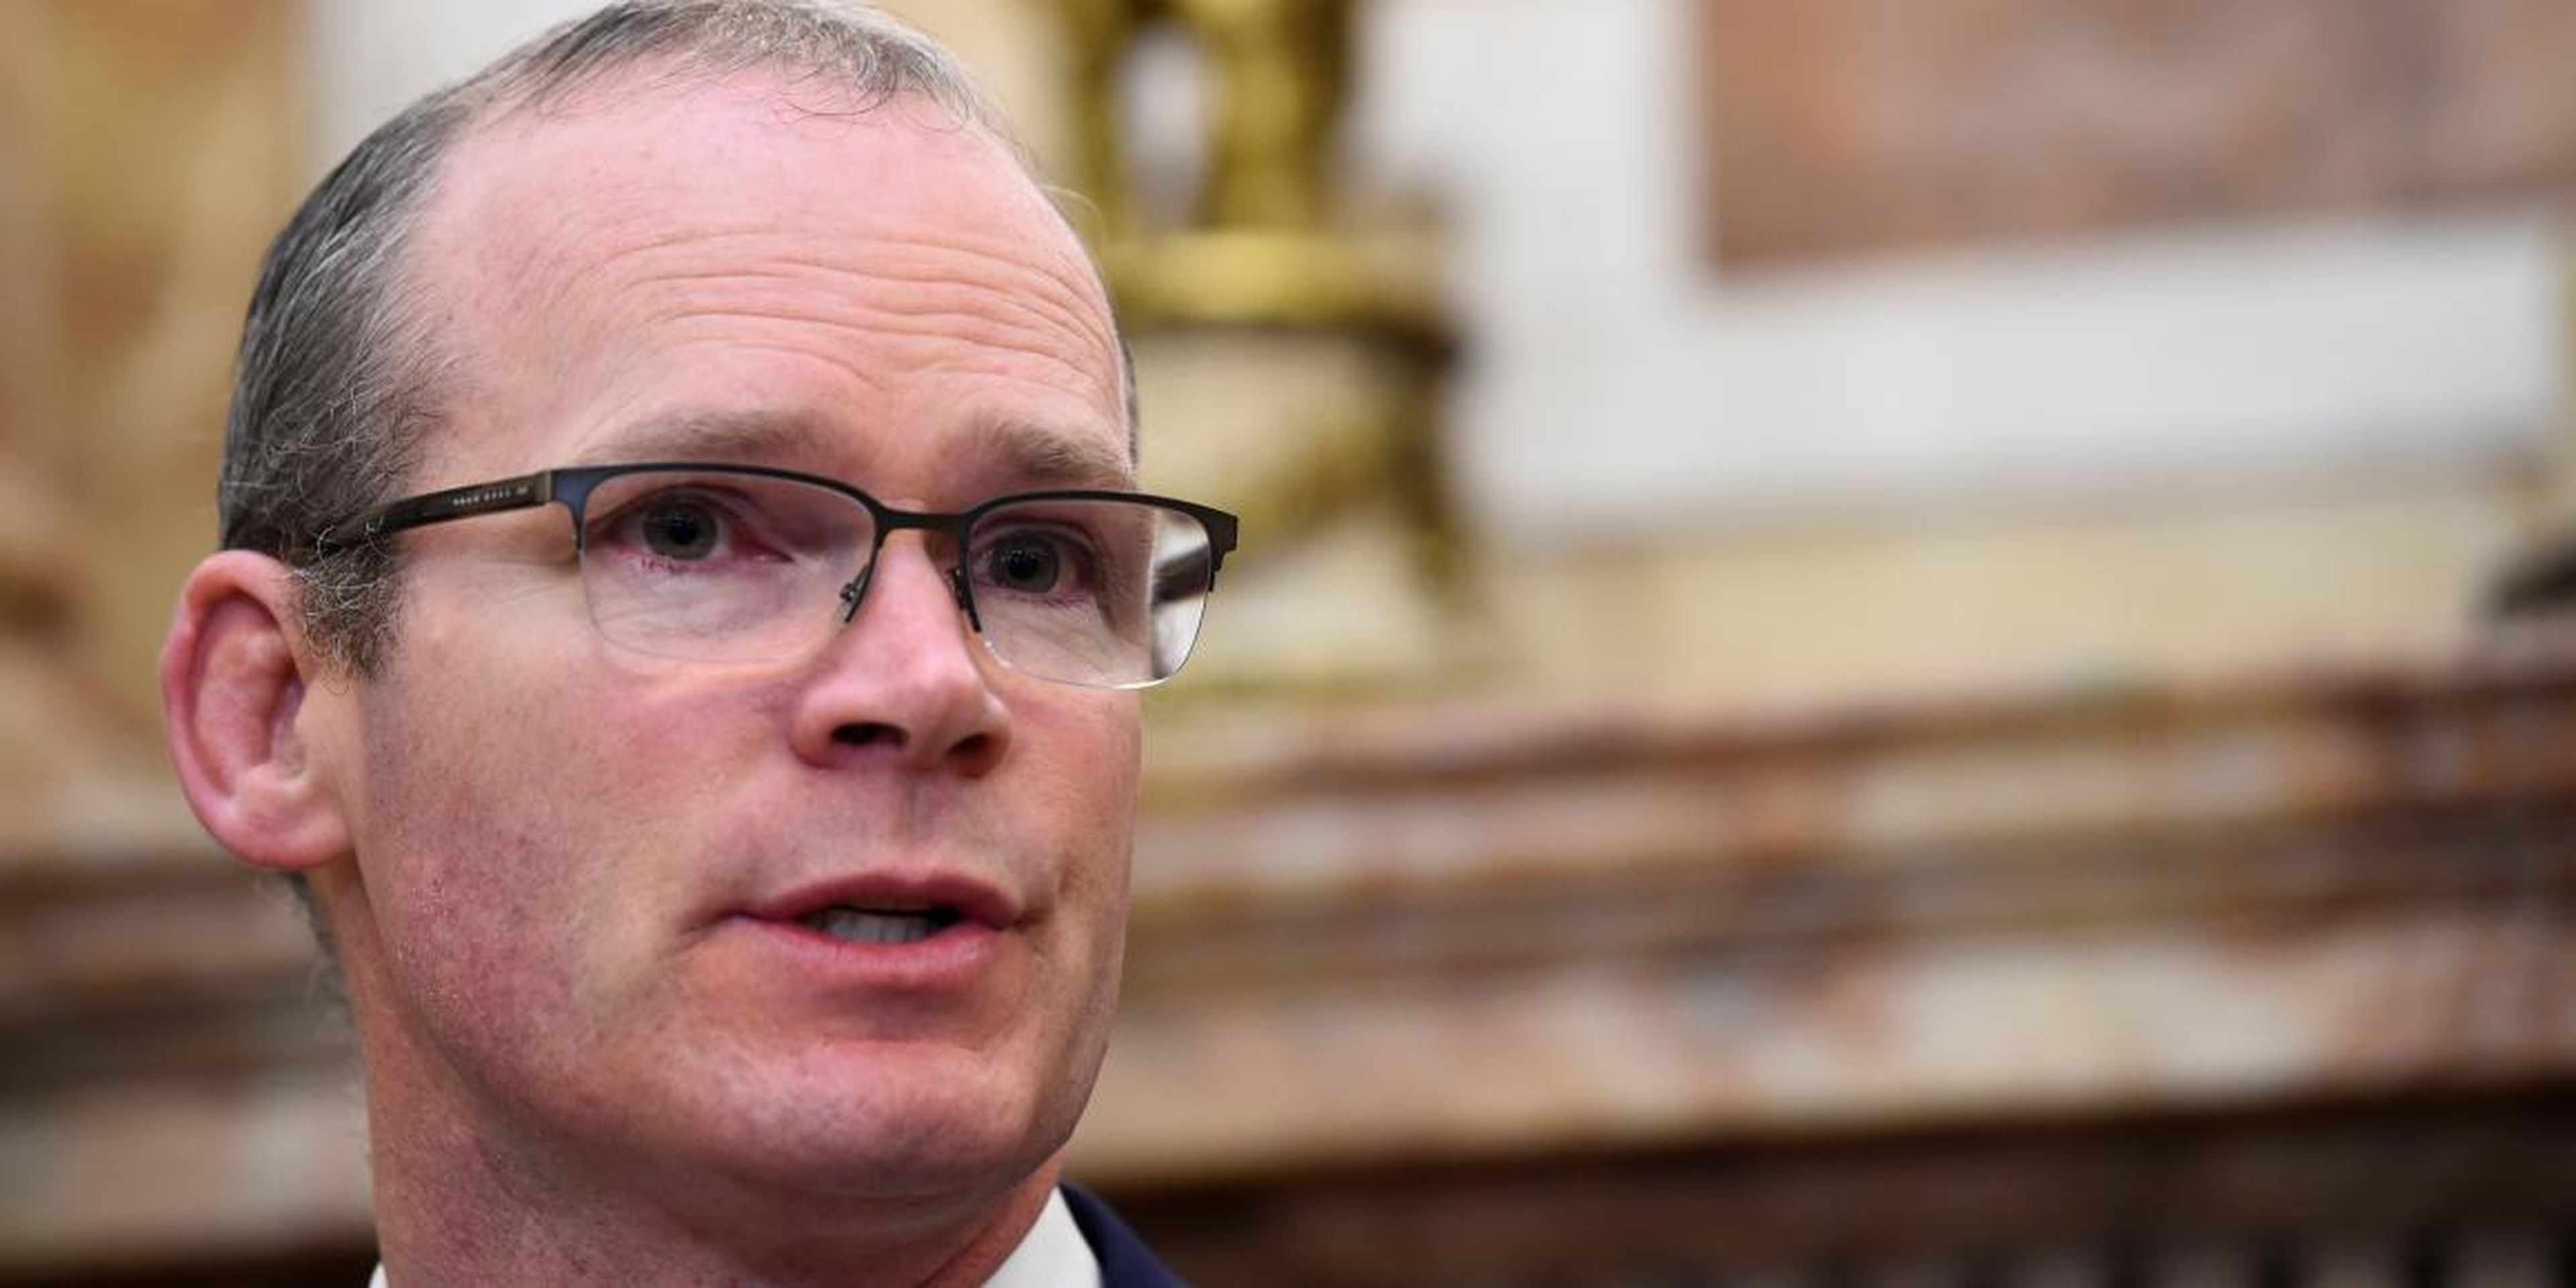 Ireland's Foreign Minister Simon Coveney speaks during a news conference in Dublin, Ireland, April 12, 2018.